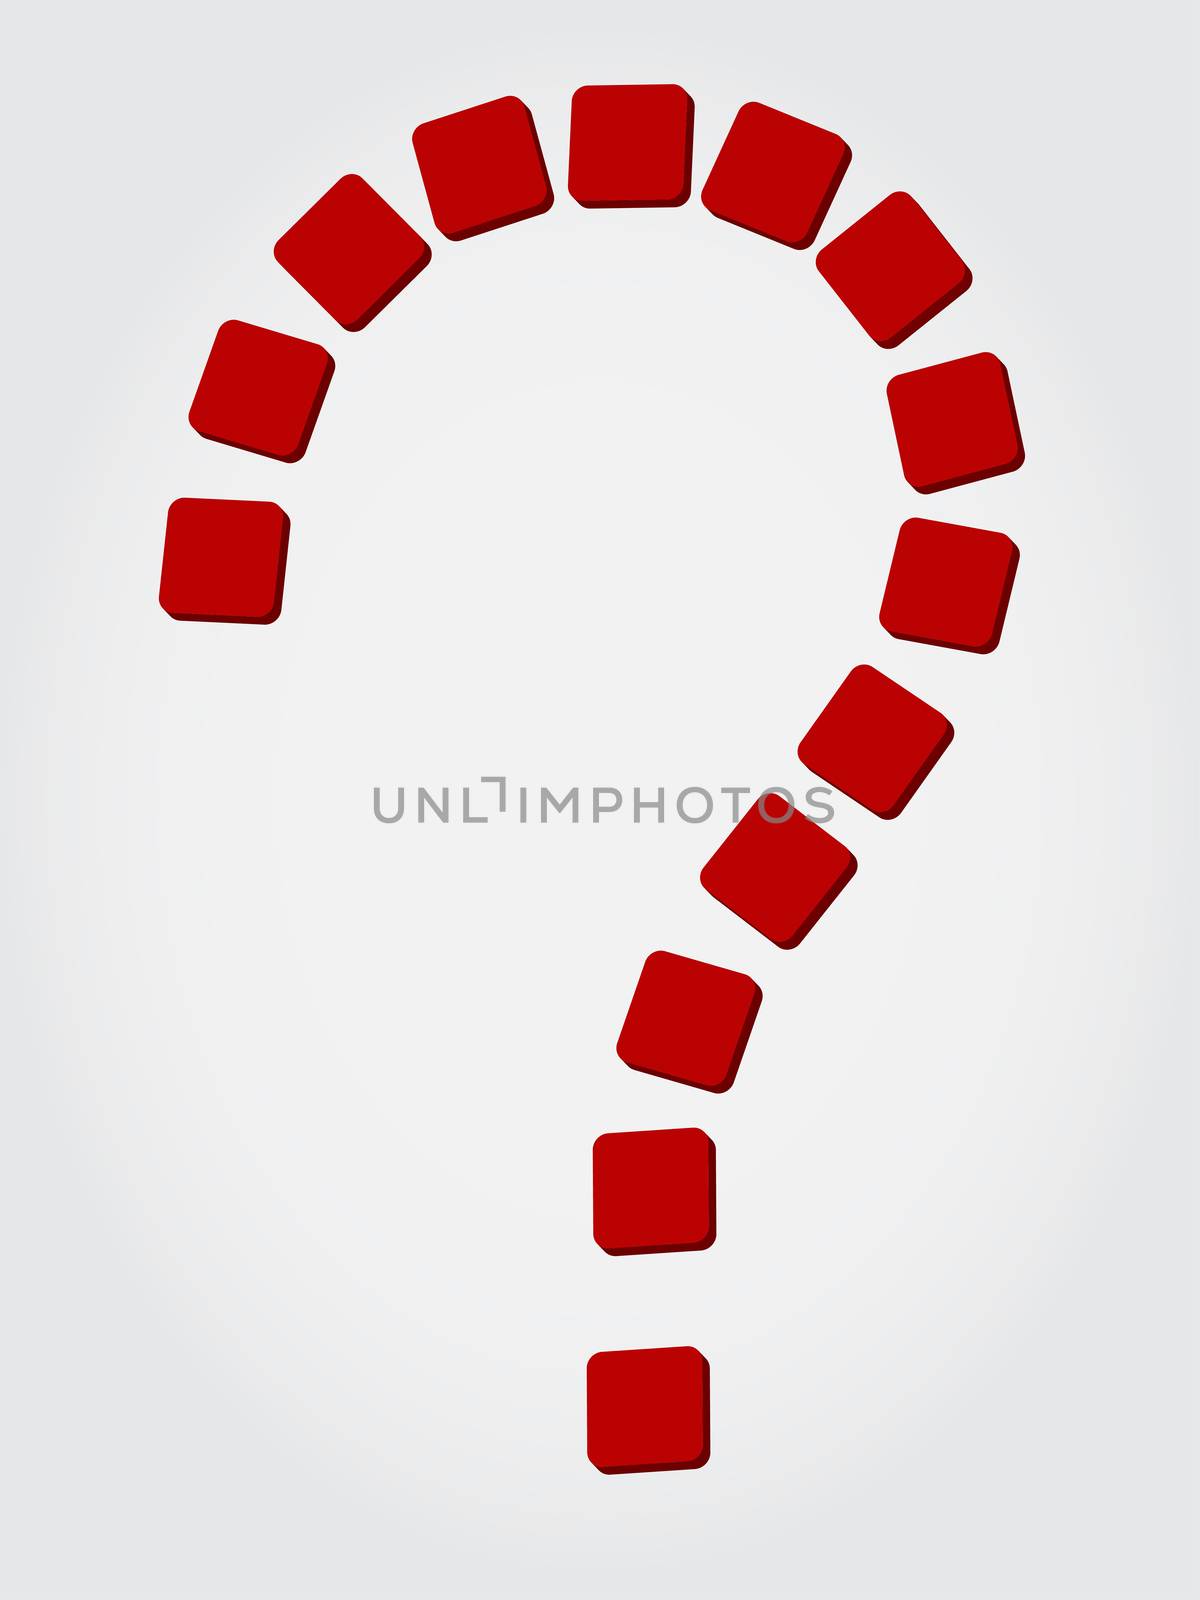 question sign - symbol of red flat design blocks, business concept